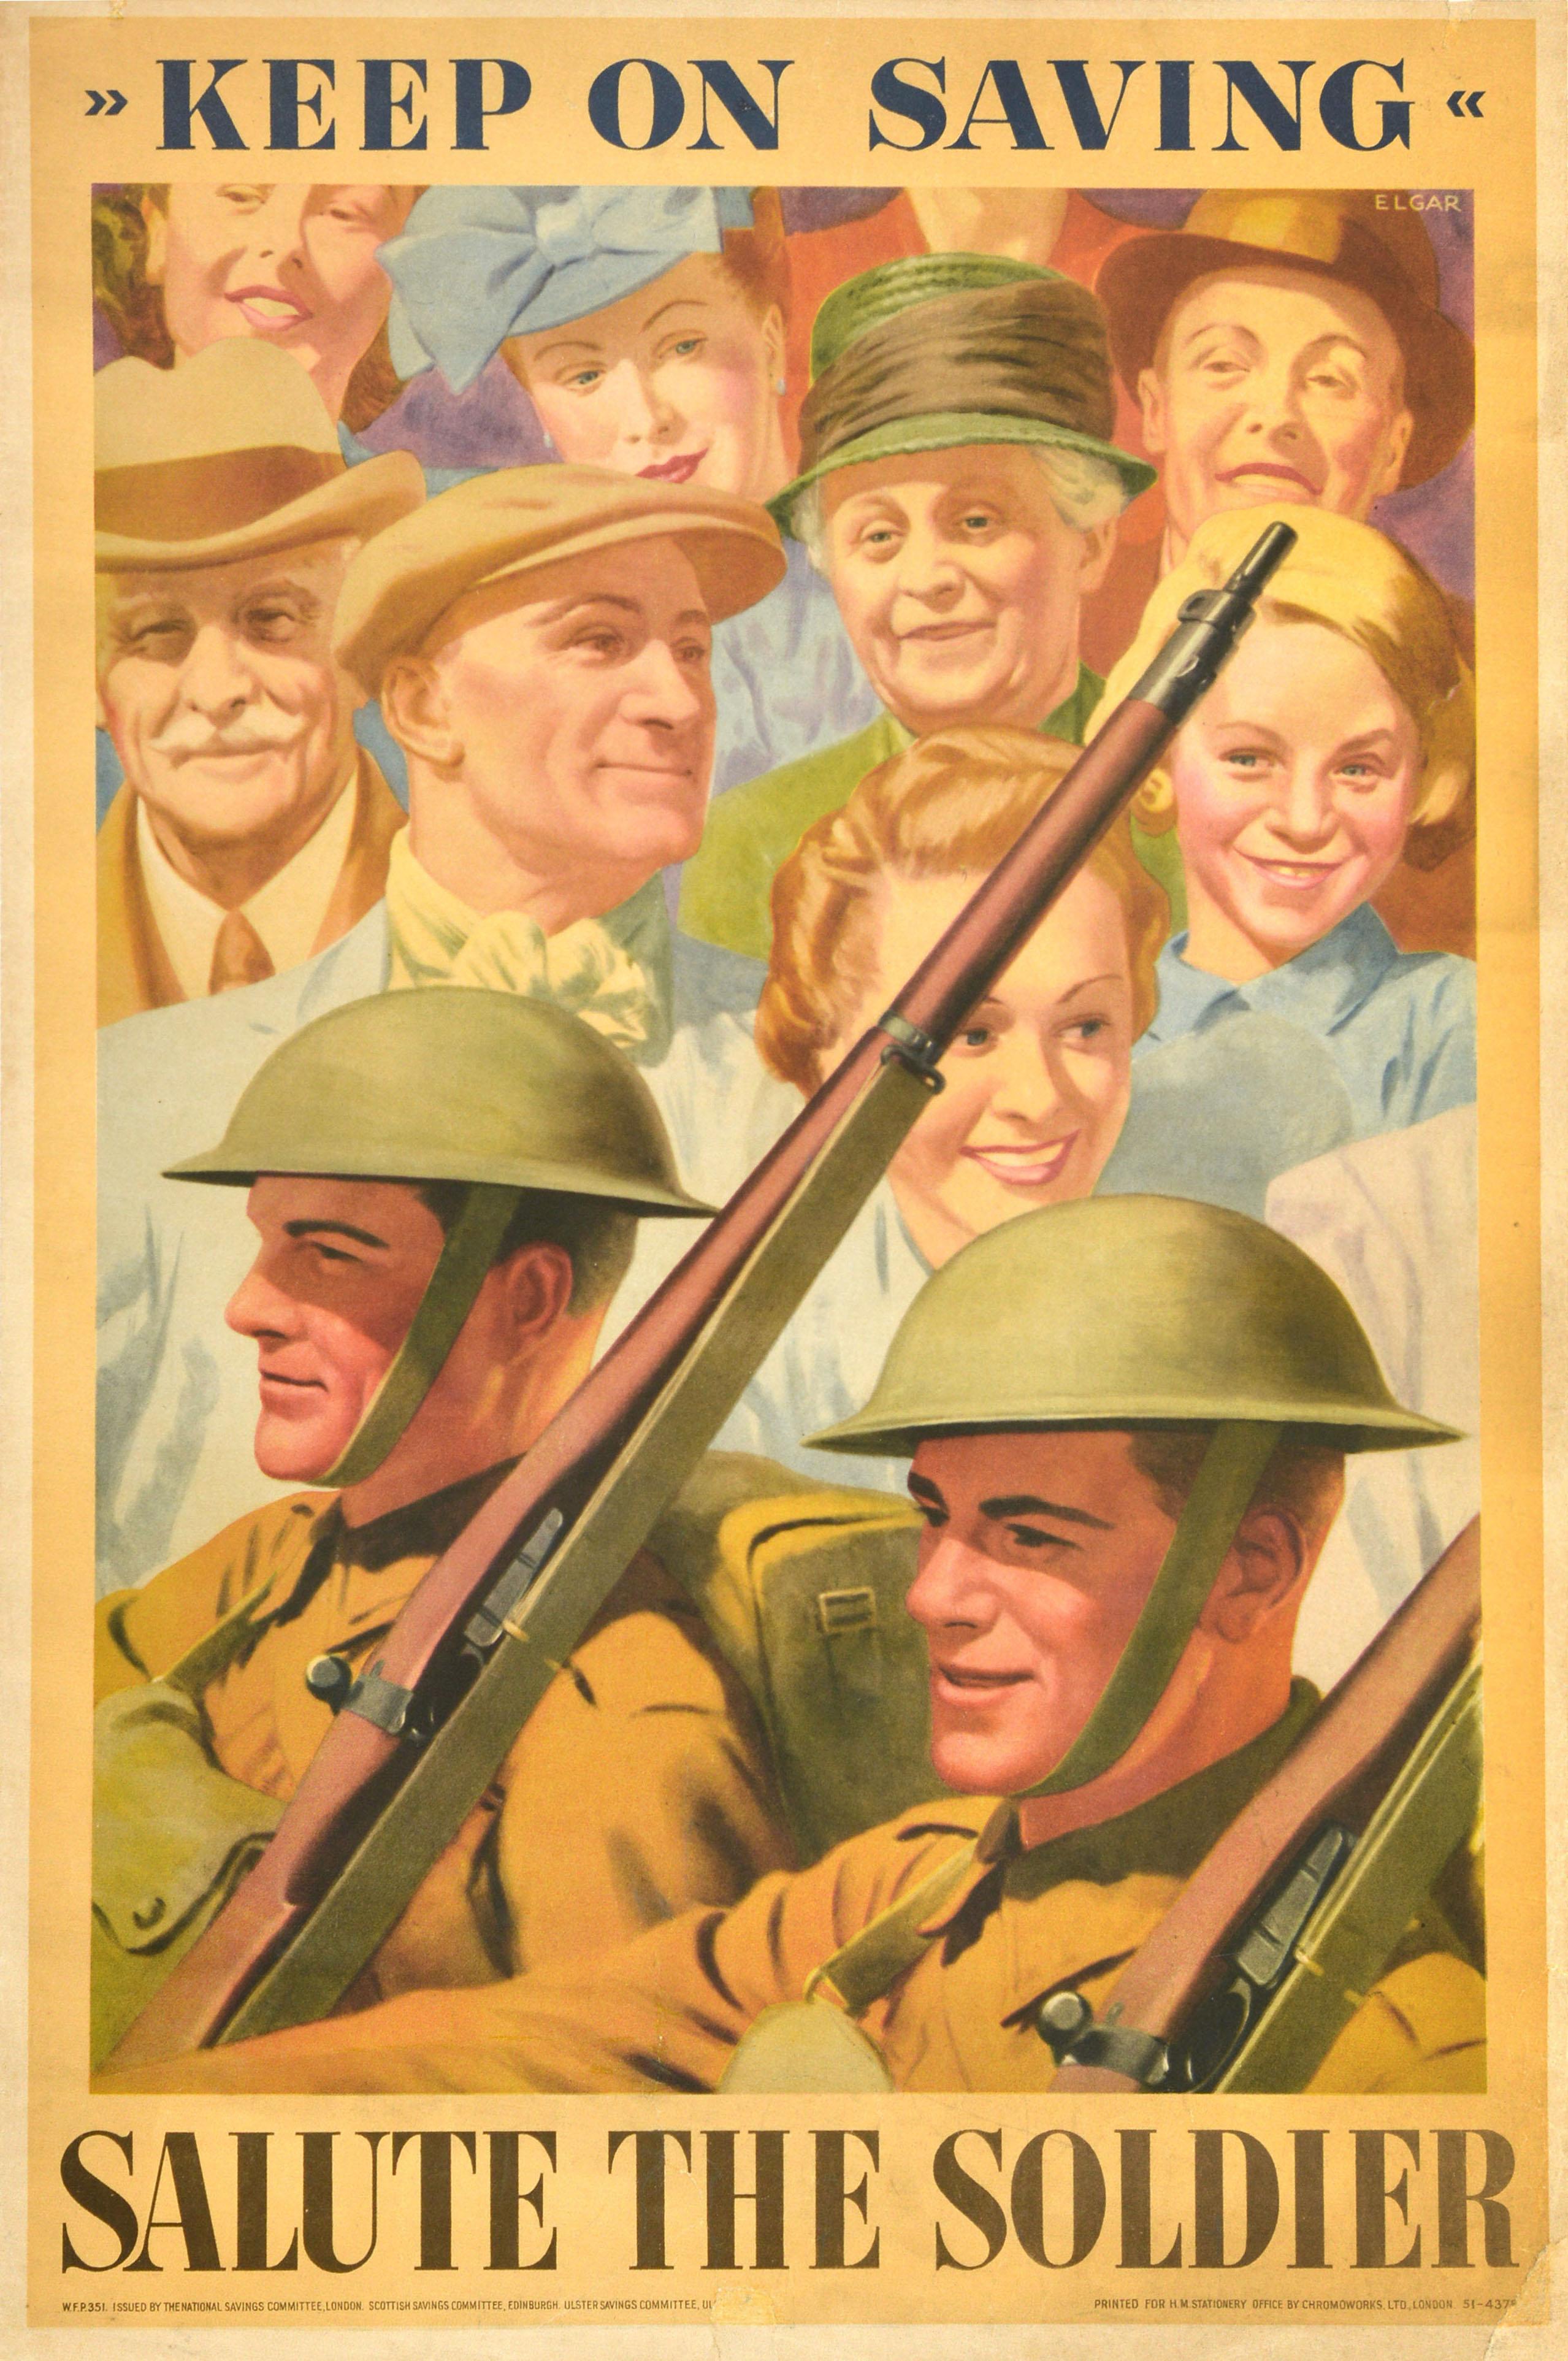 Unknown Print - Original Vintage War Poster Salute The Soldier WWII National Savings Home Front